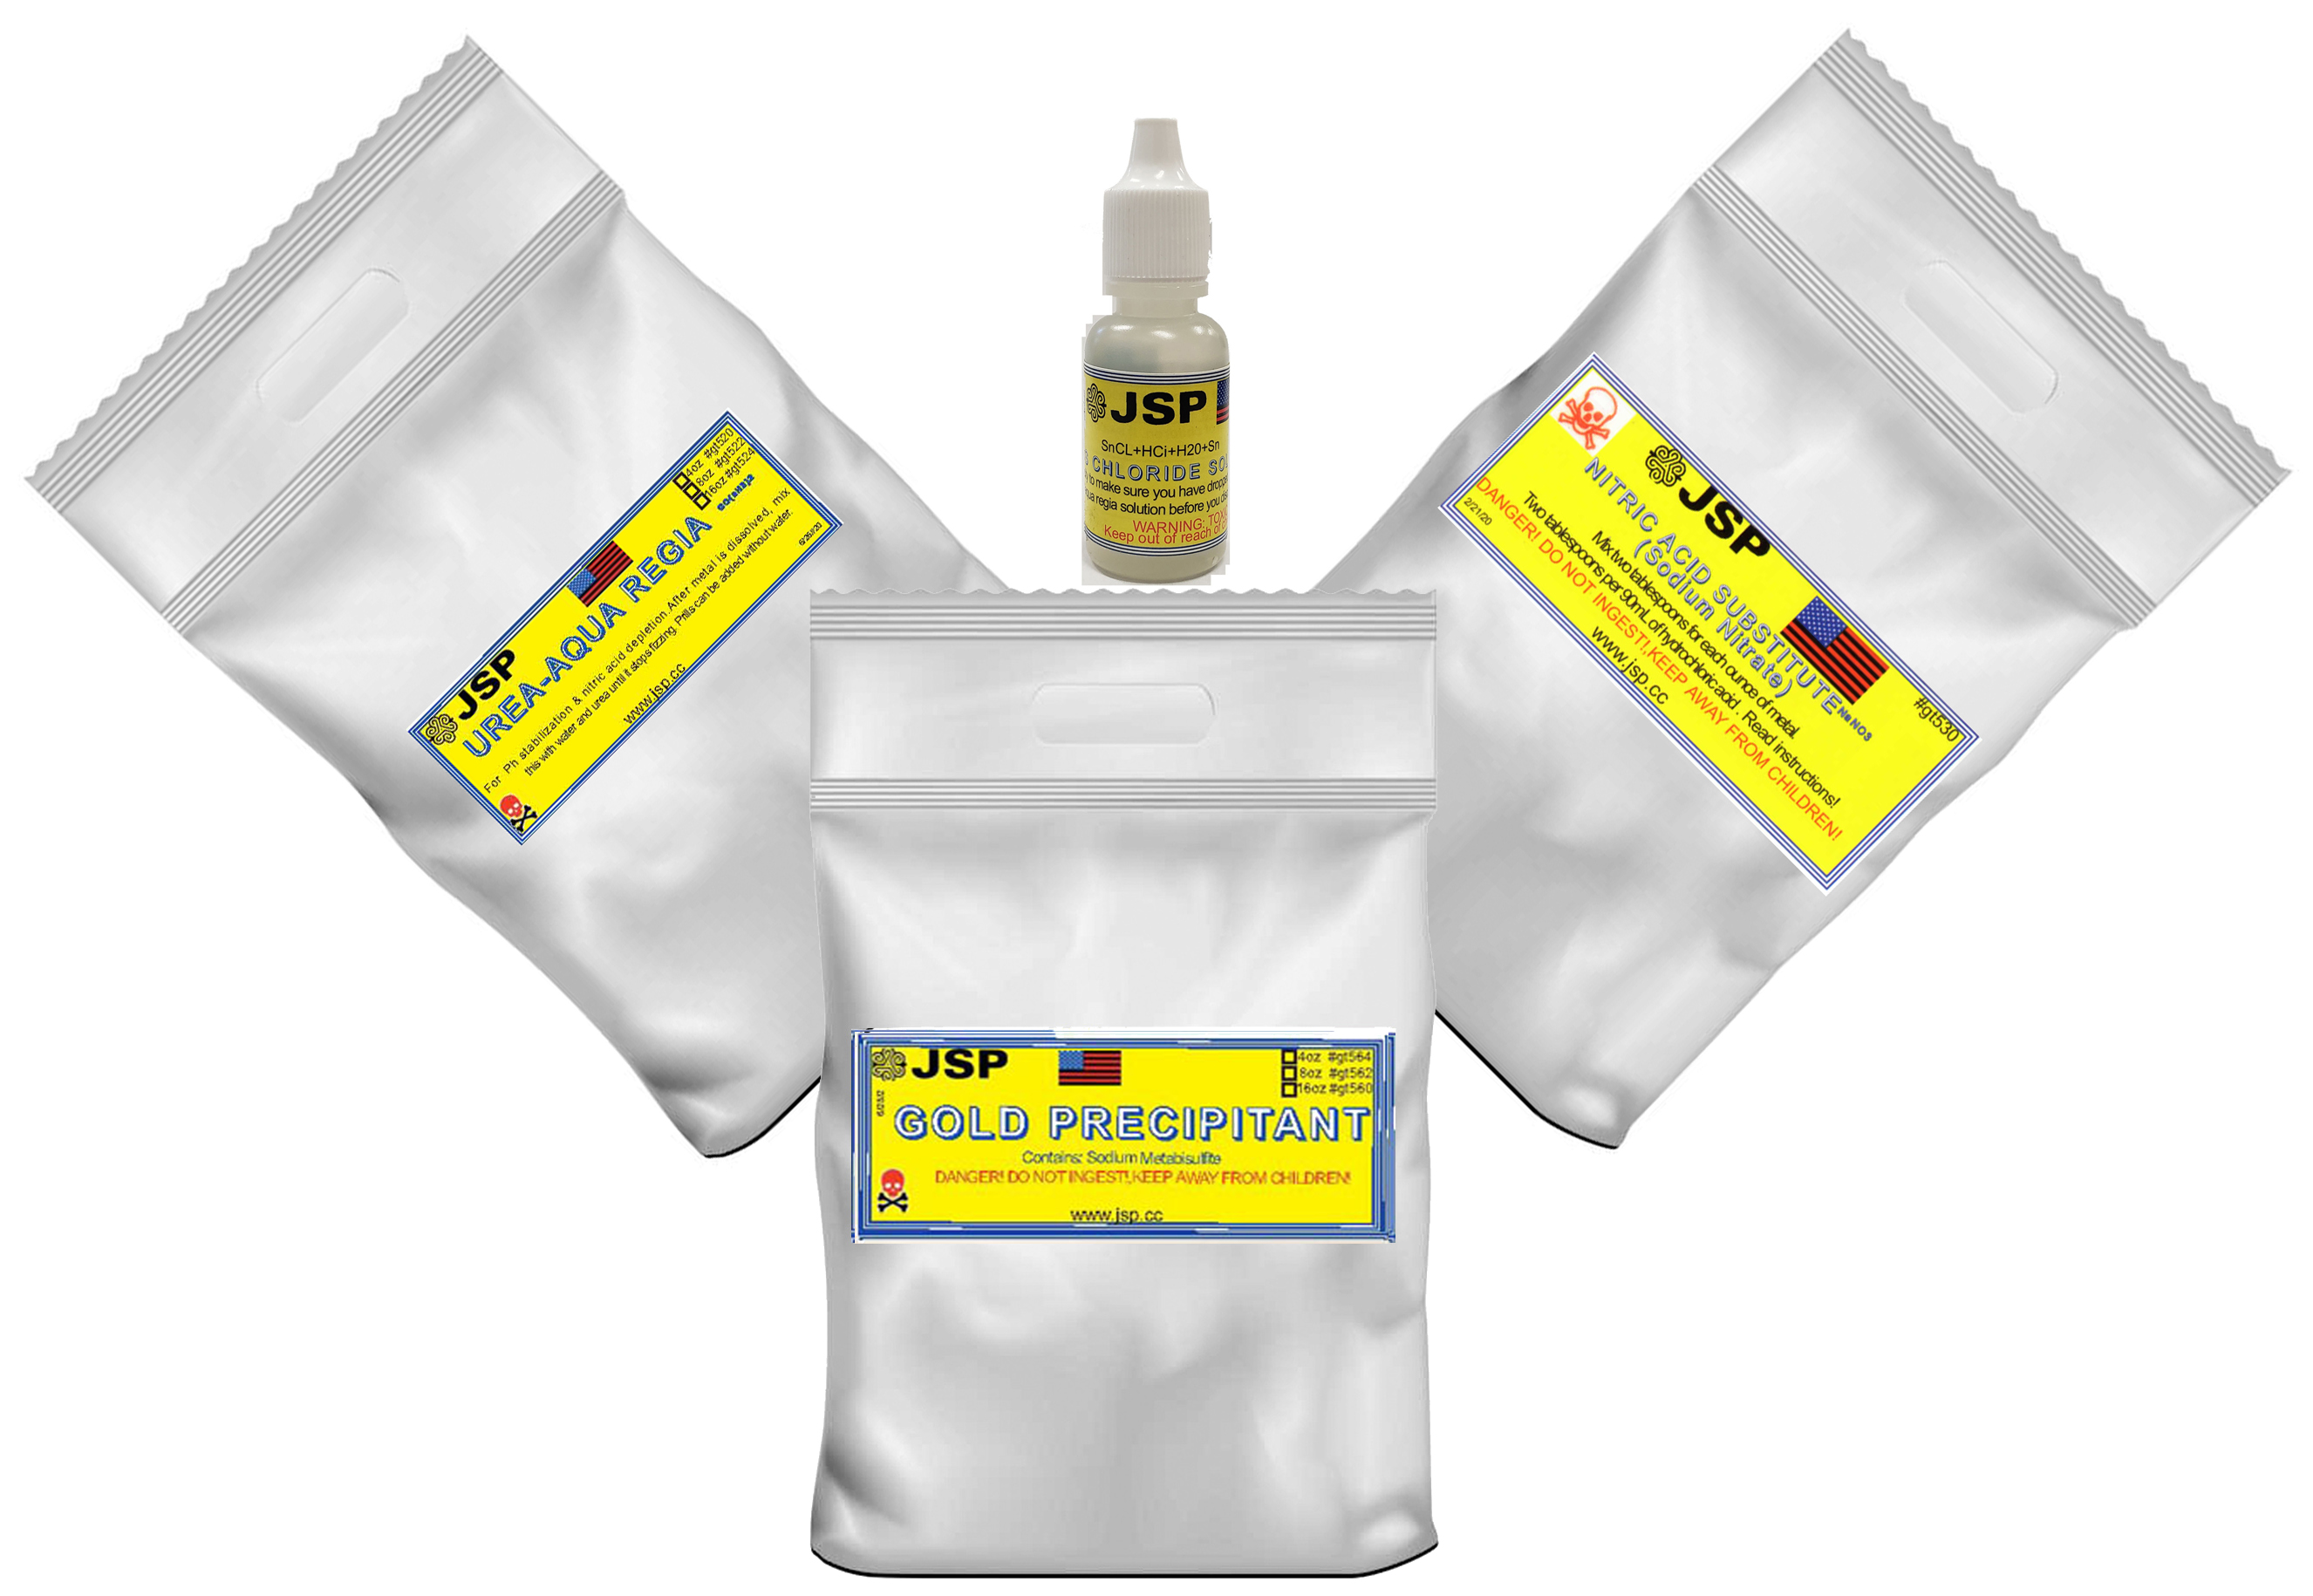 Aqua regia gold refining supply kit, 3x 1/2lb bags+ Gold Precipitant +Stannous Chloride with instructions. - Click Image to Close